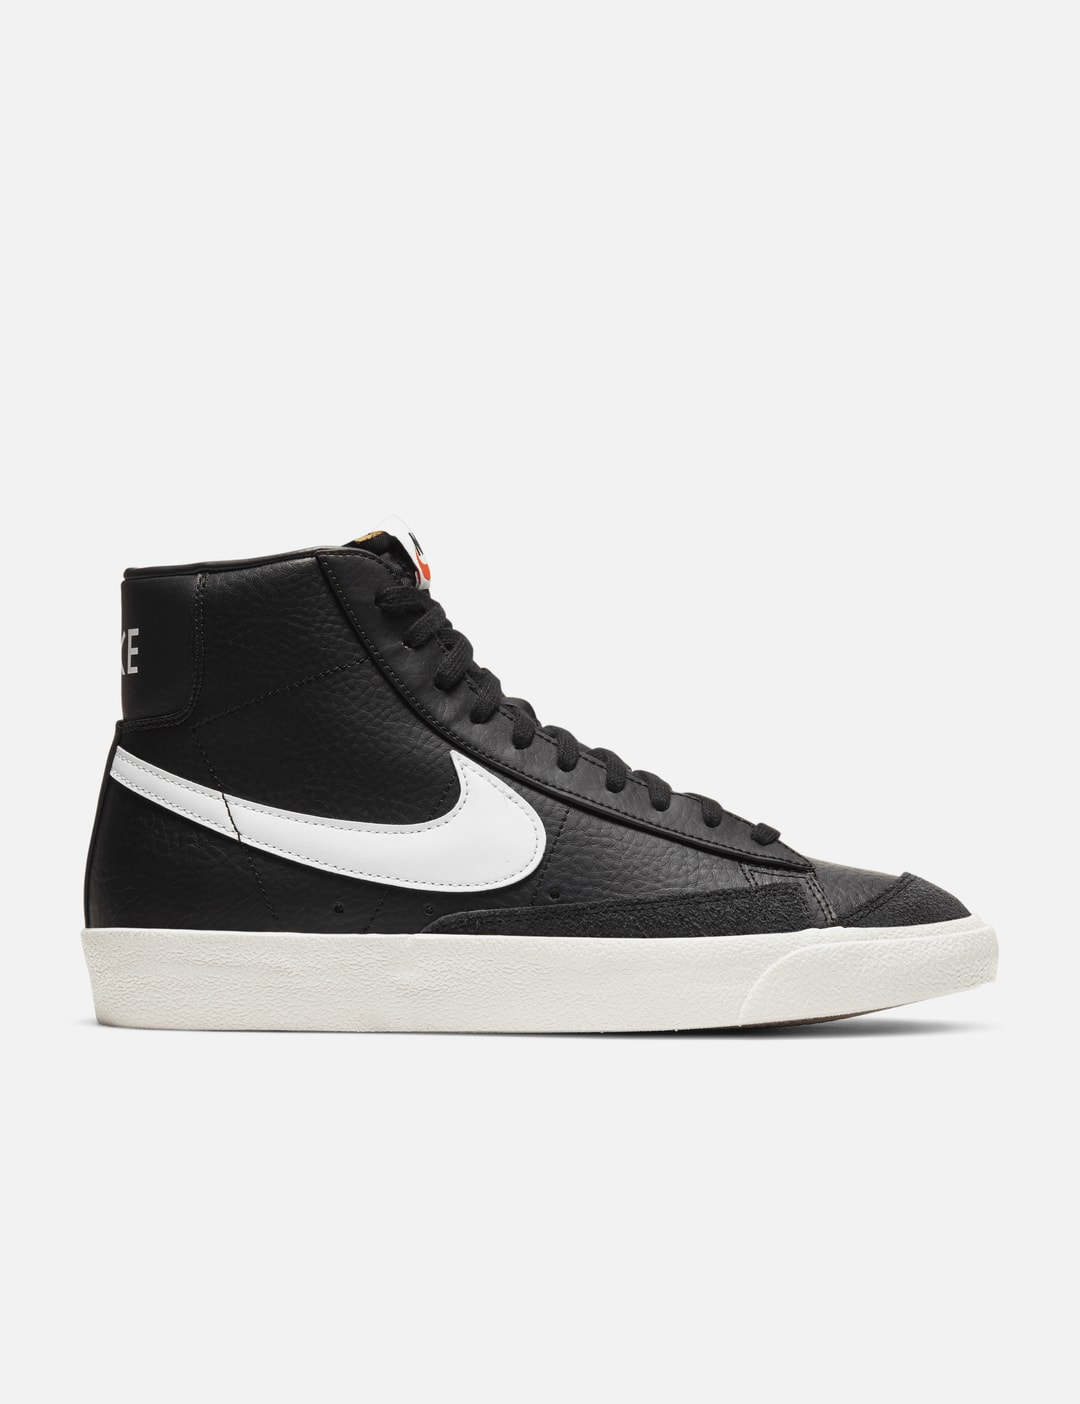 laden Open Draaien Nike - Nike Blazer Mid '77 Vintage | HBX - Globally Curated Fashion and  Lifestyle by Hypebeast